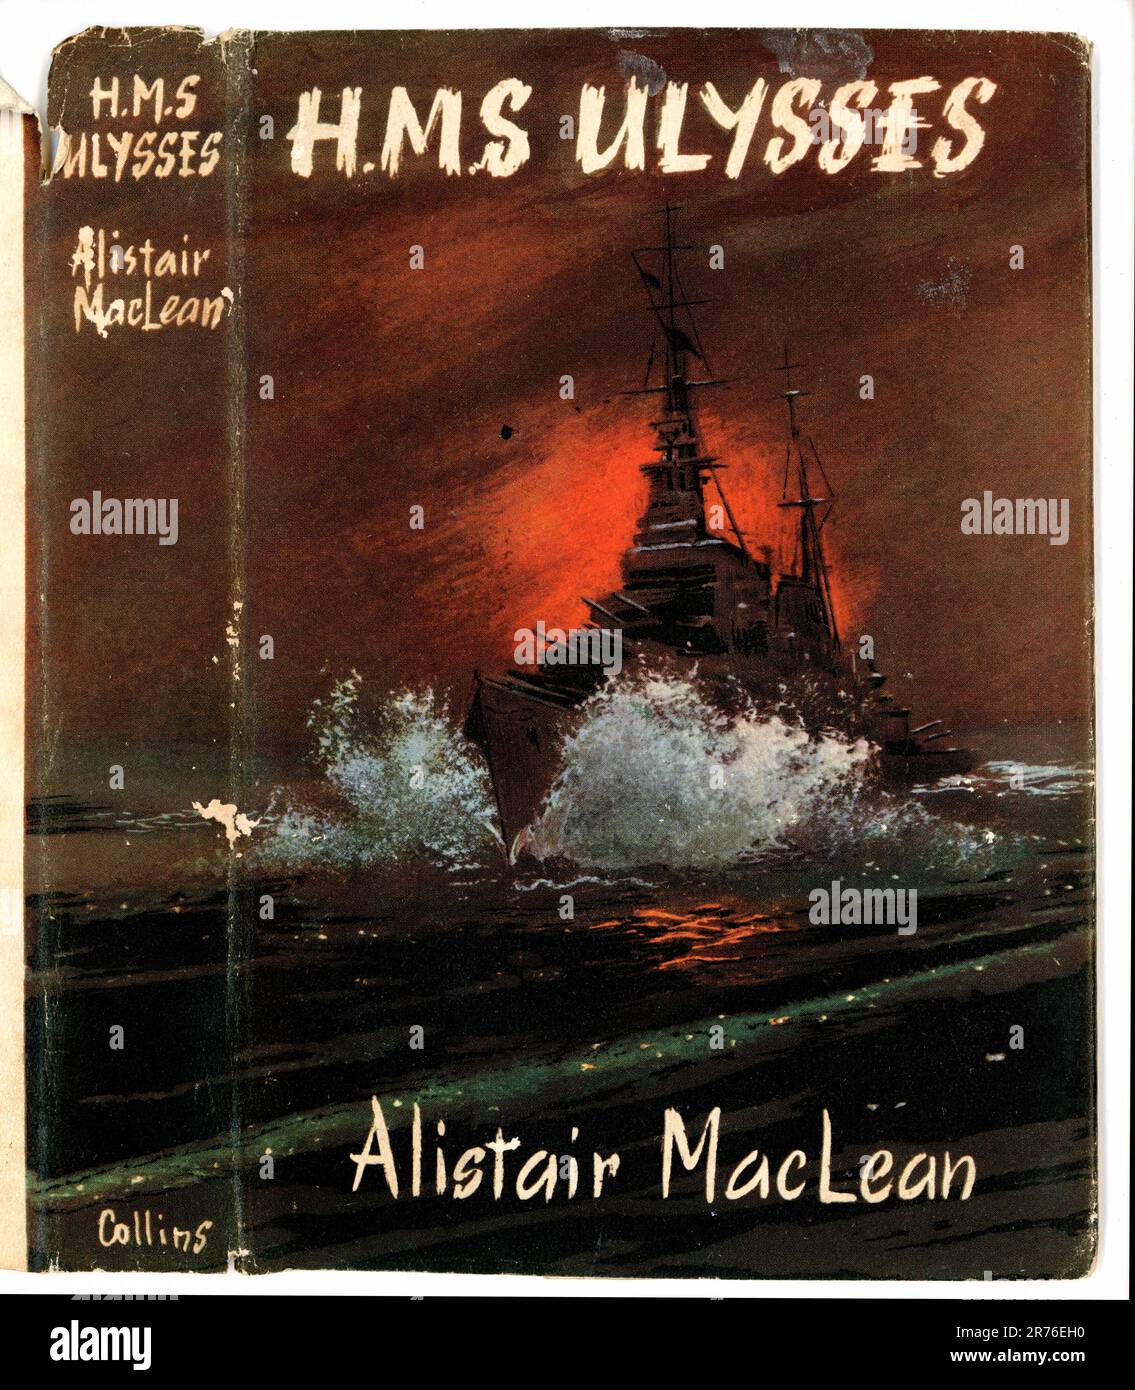 H.M.S. Ulysses by Scottish author, Alistair Maclean, published in 1955, the original mid-century illustrated 1950's book cover, illustrated by John Rose. The book tells the story of the  difficult challenges faced by the Arctic convoys to Russia during World War II. Stock Photo